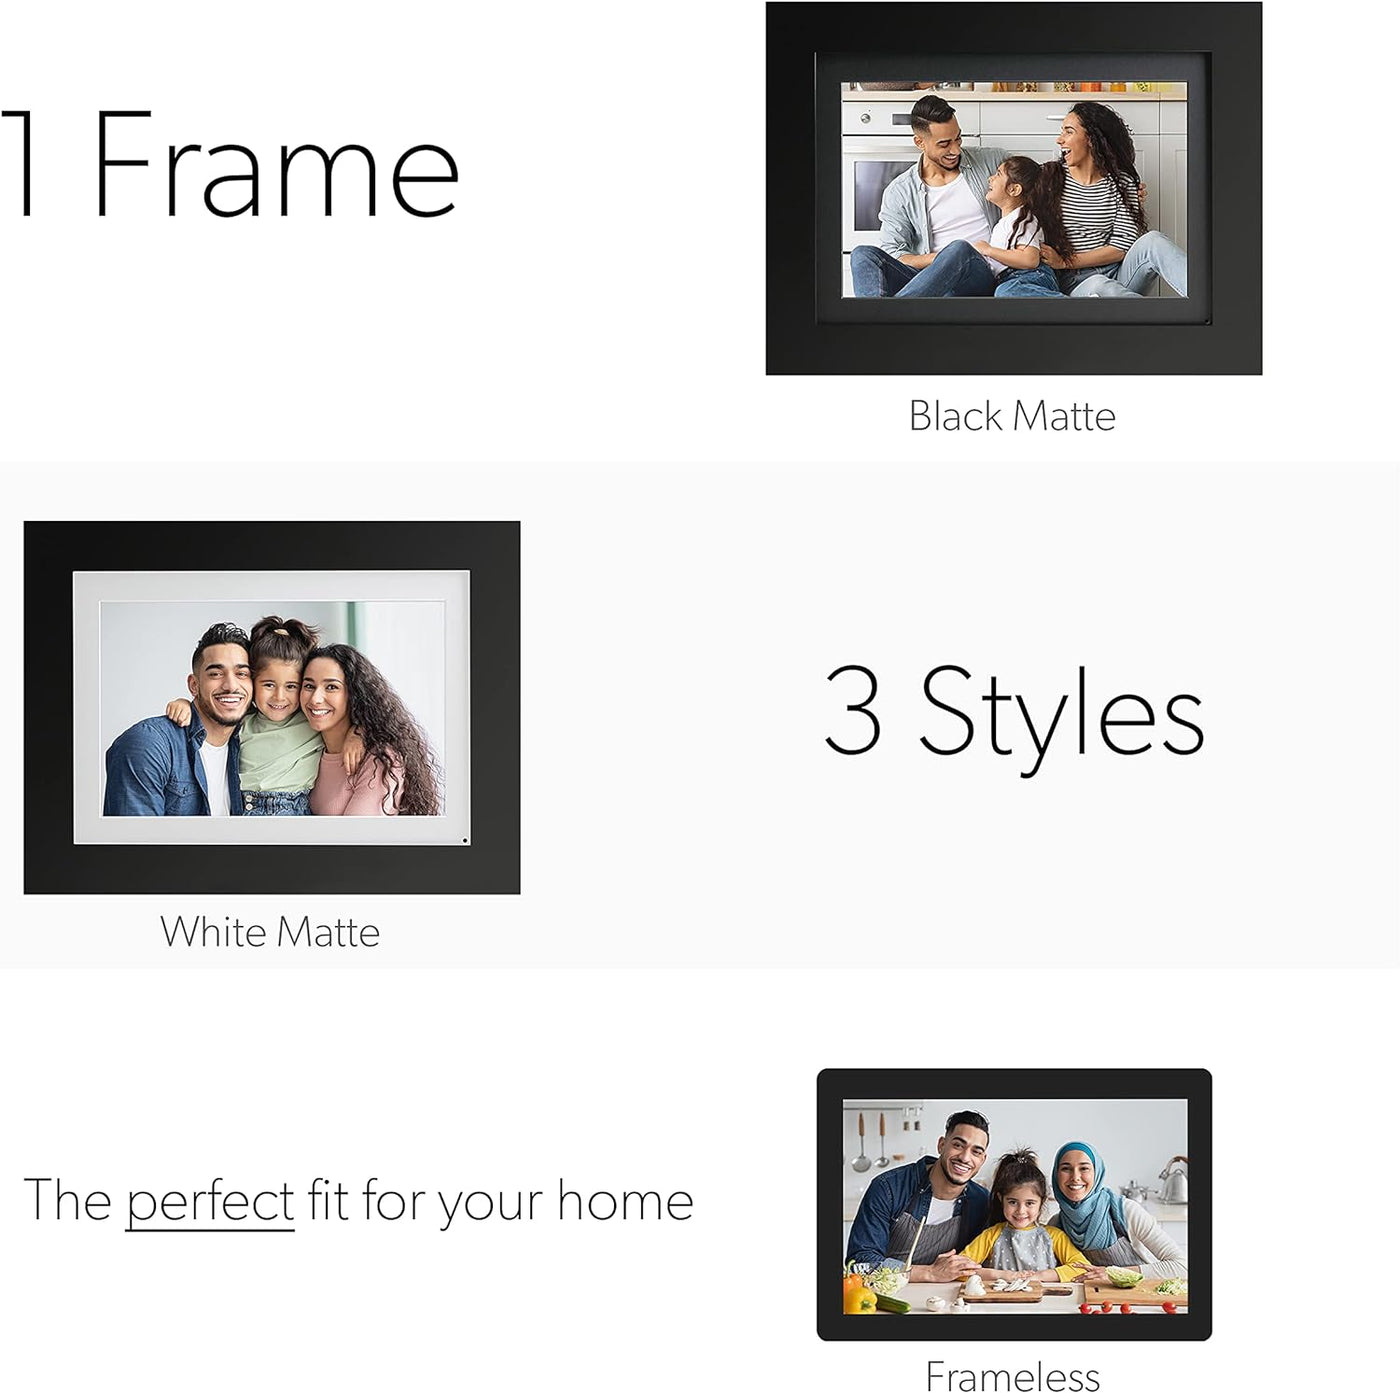 Simply Smart Home Photoshare 8” WiFi Digital Picture Frame - $55